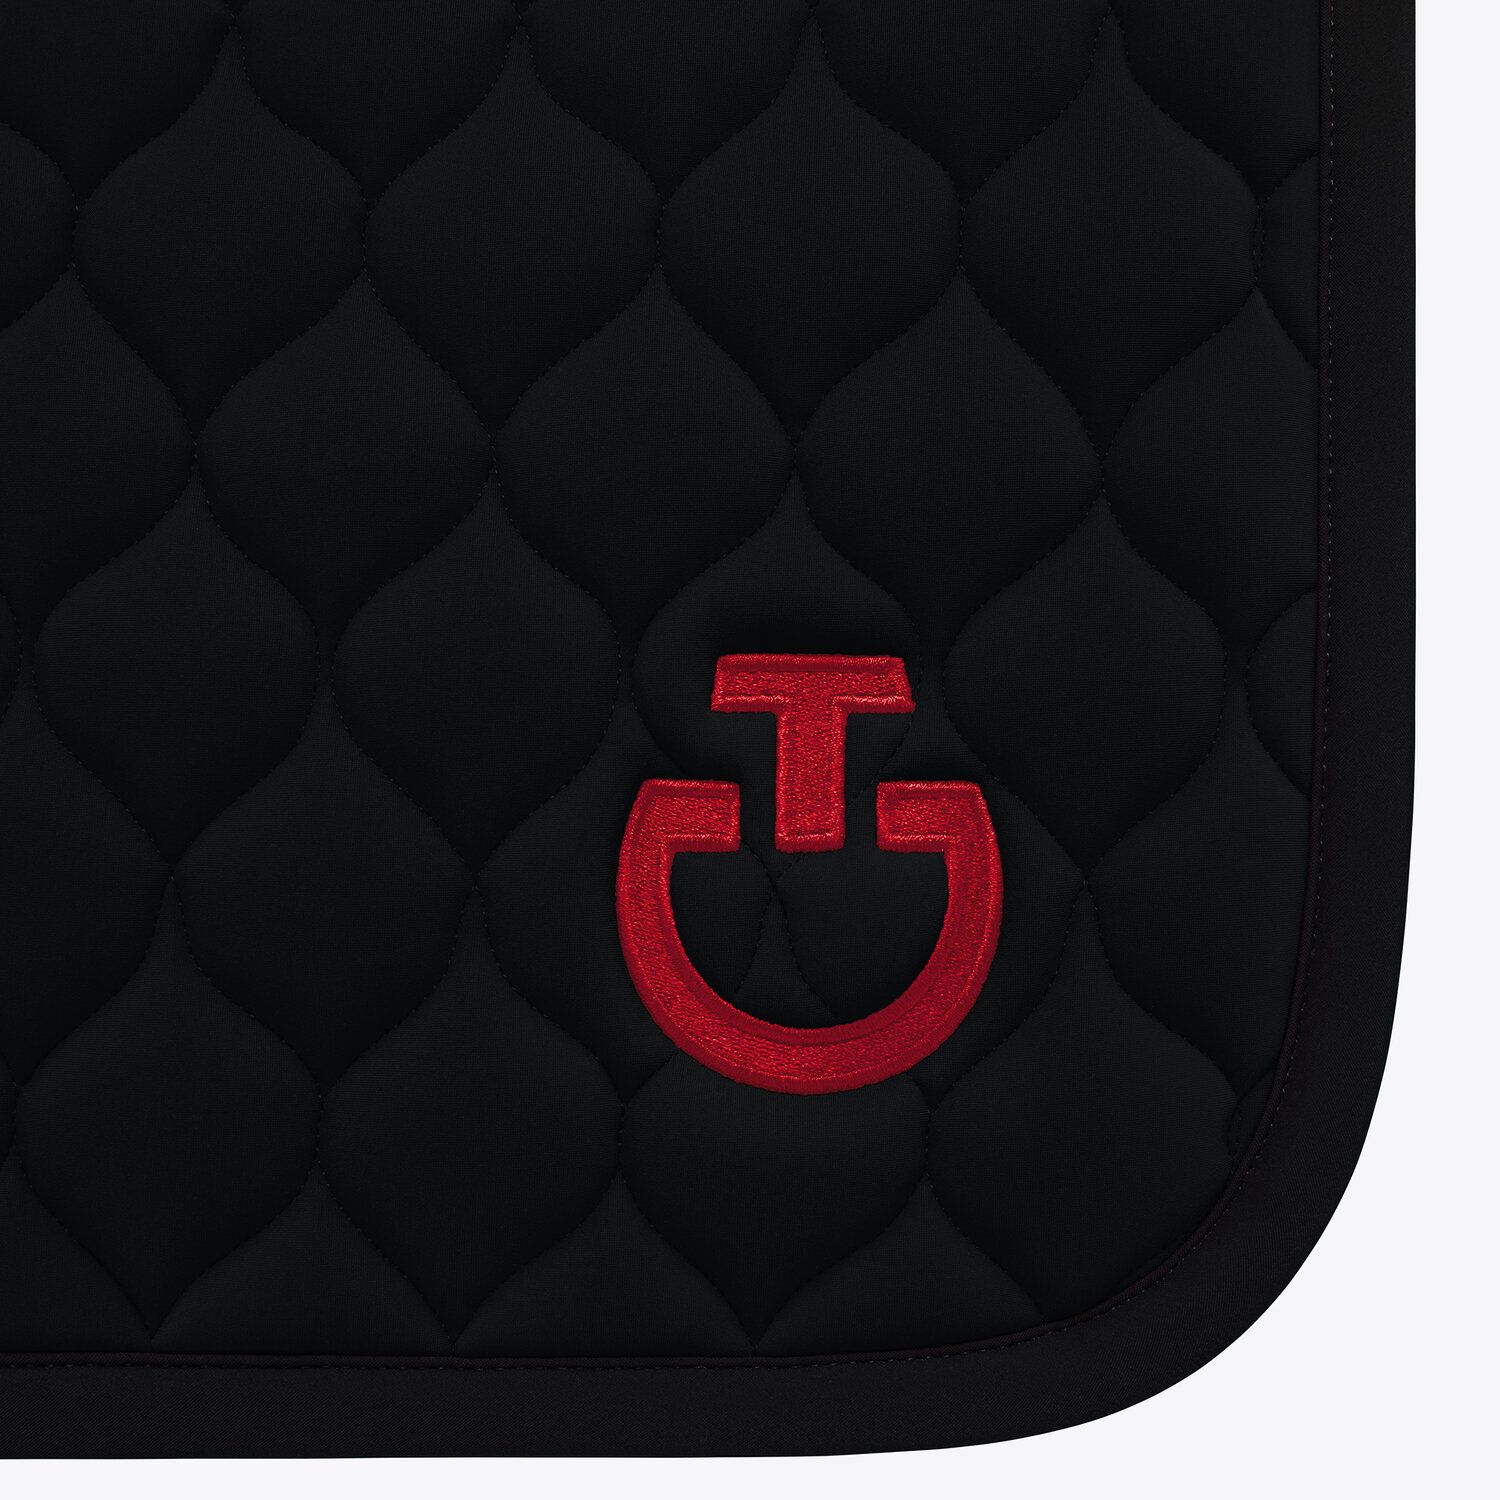 CIRCULAR QUILTED JERSEY JUMPING SADDLE PAD BLACK/RED